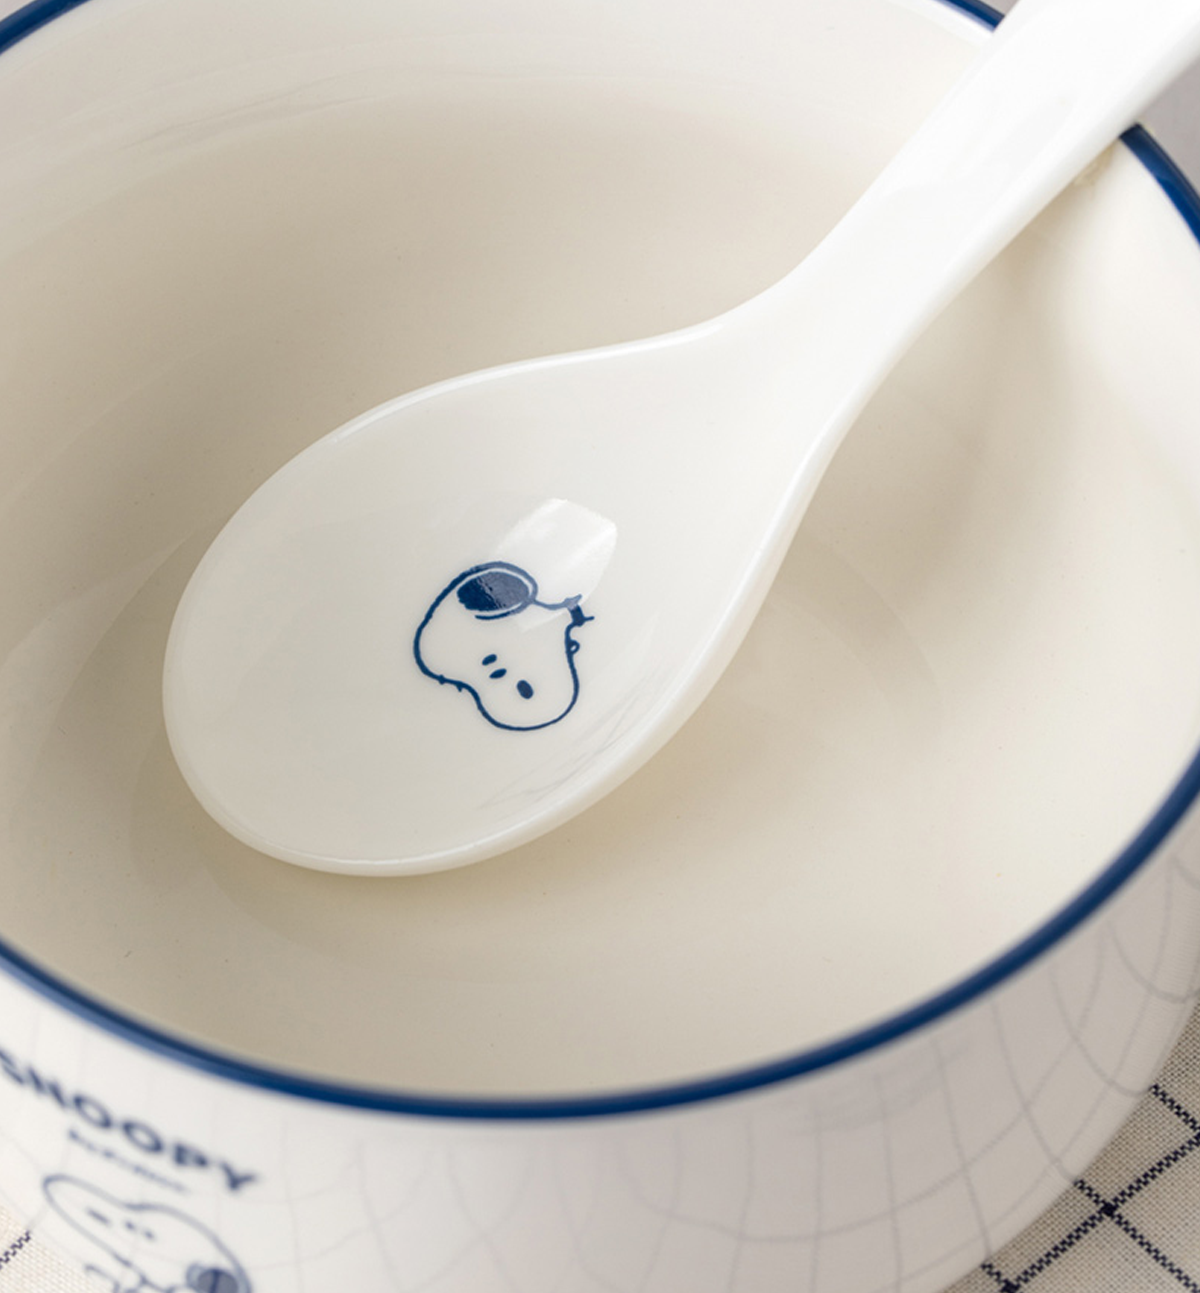 Snoopy Cereal Bowl + Spoon Set